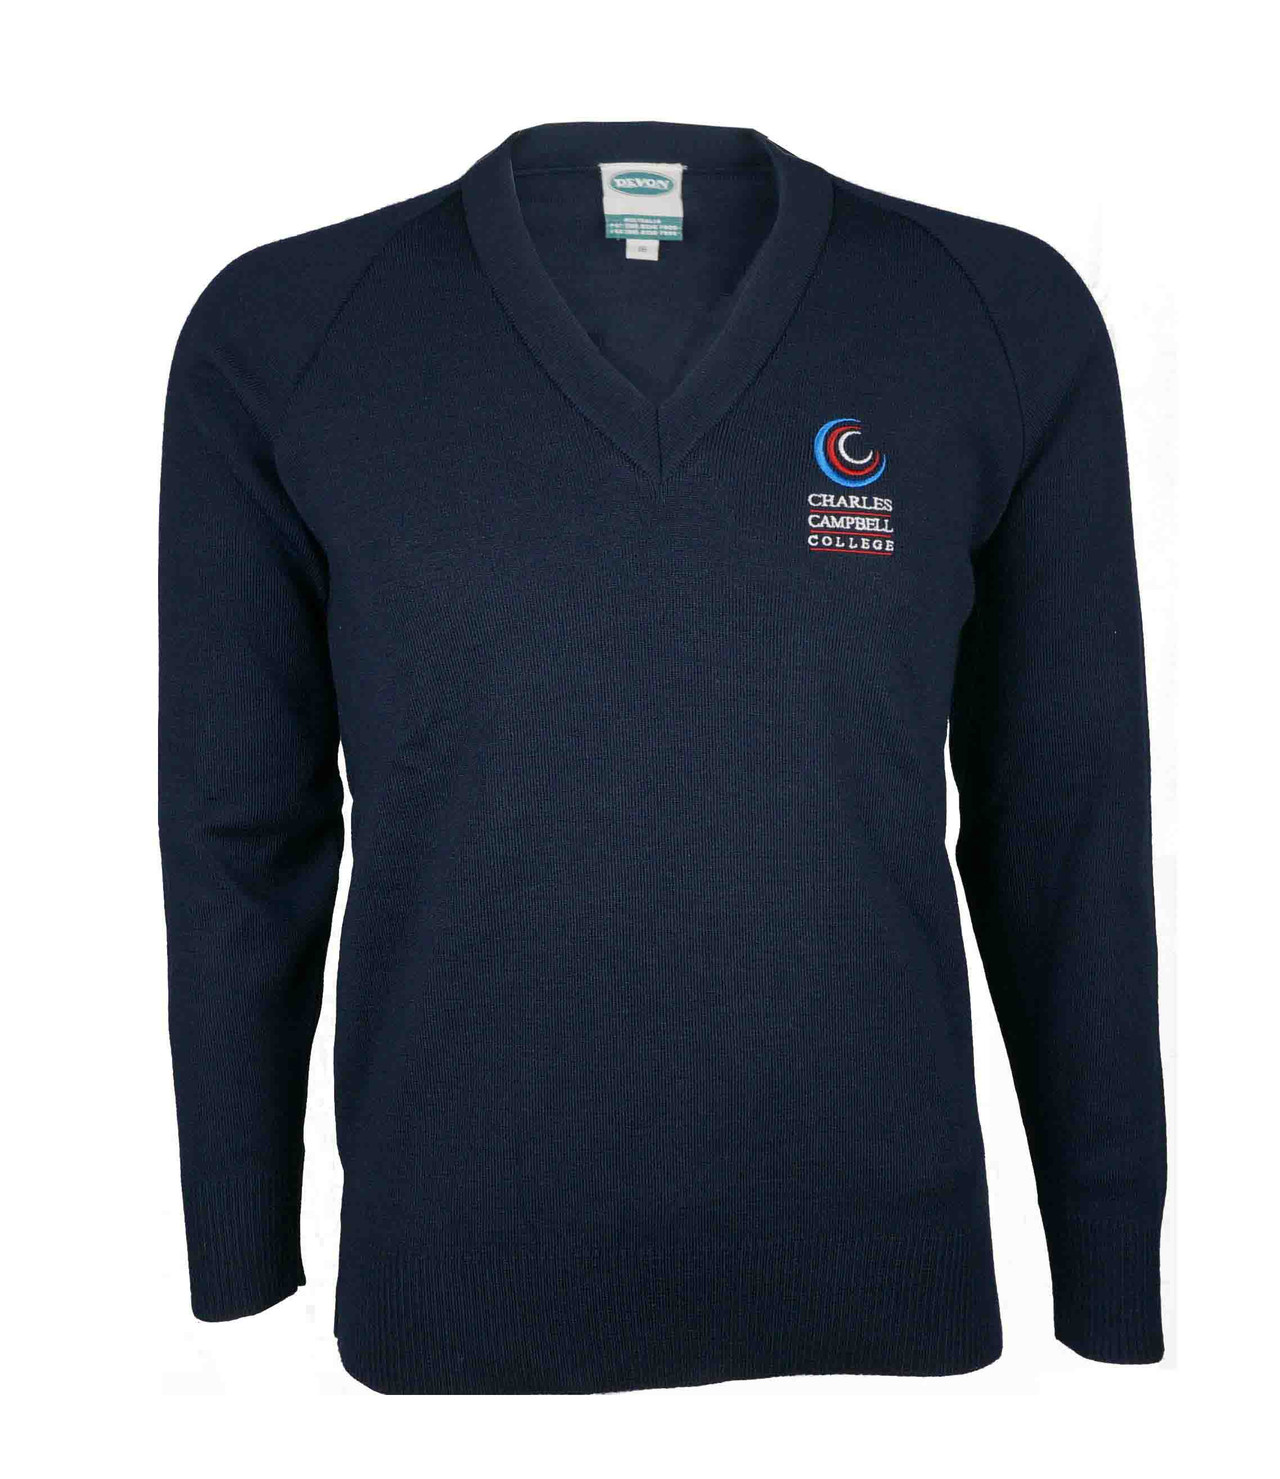 Shop by School - Charles Campbell College - Page 1 - Devon Clothing